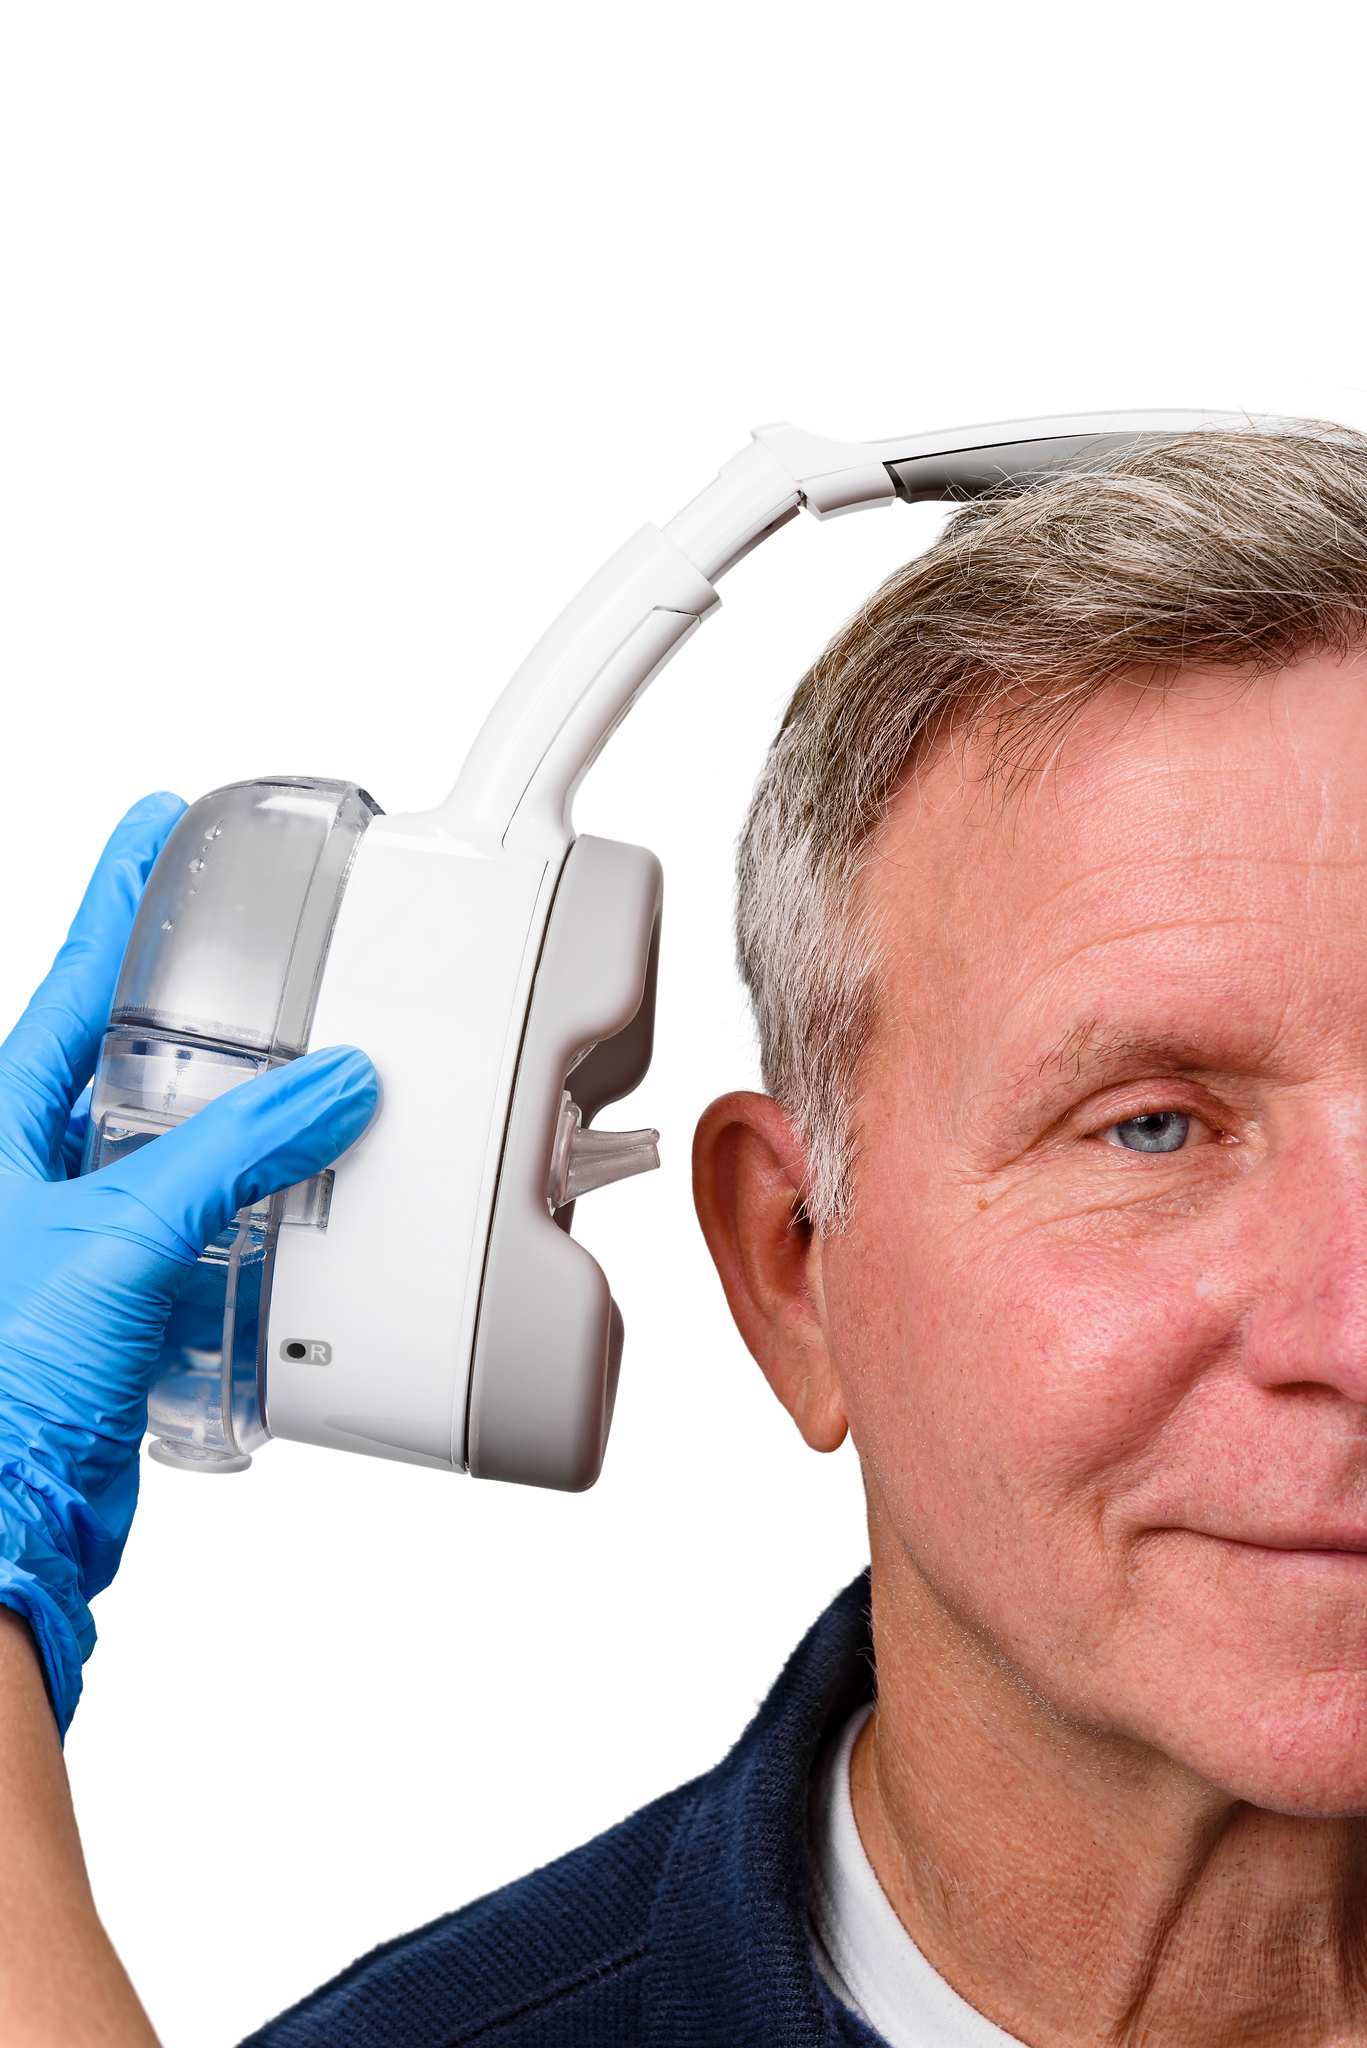 FDA-Cleared OtoSet® Ear Cleaning System - Earwax Removal